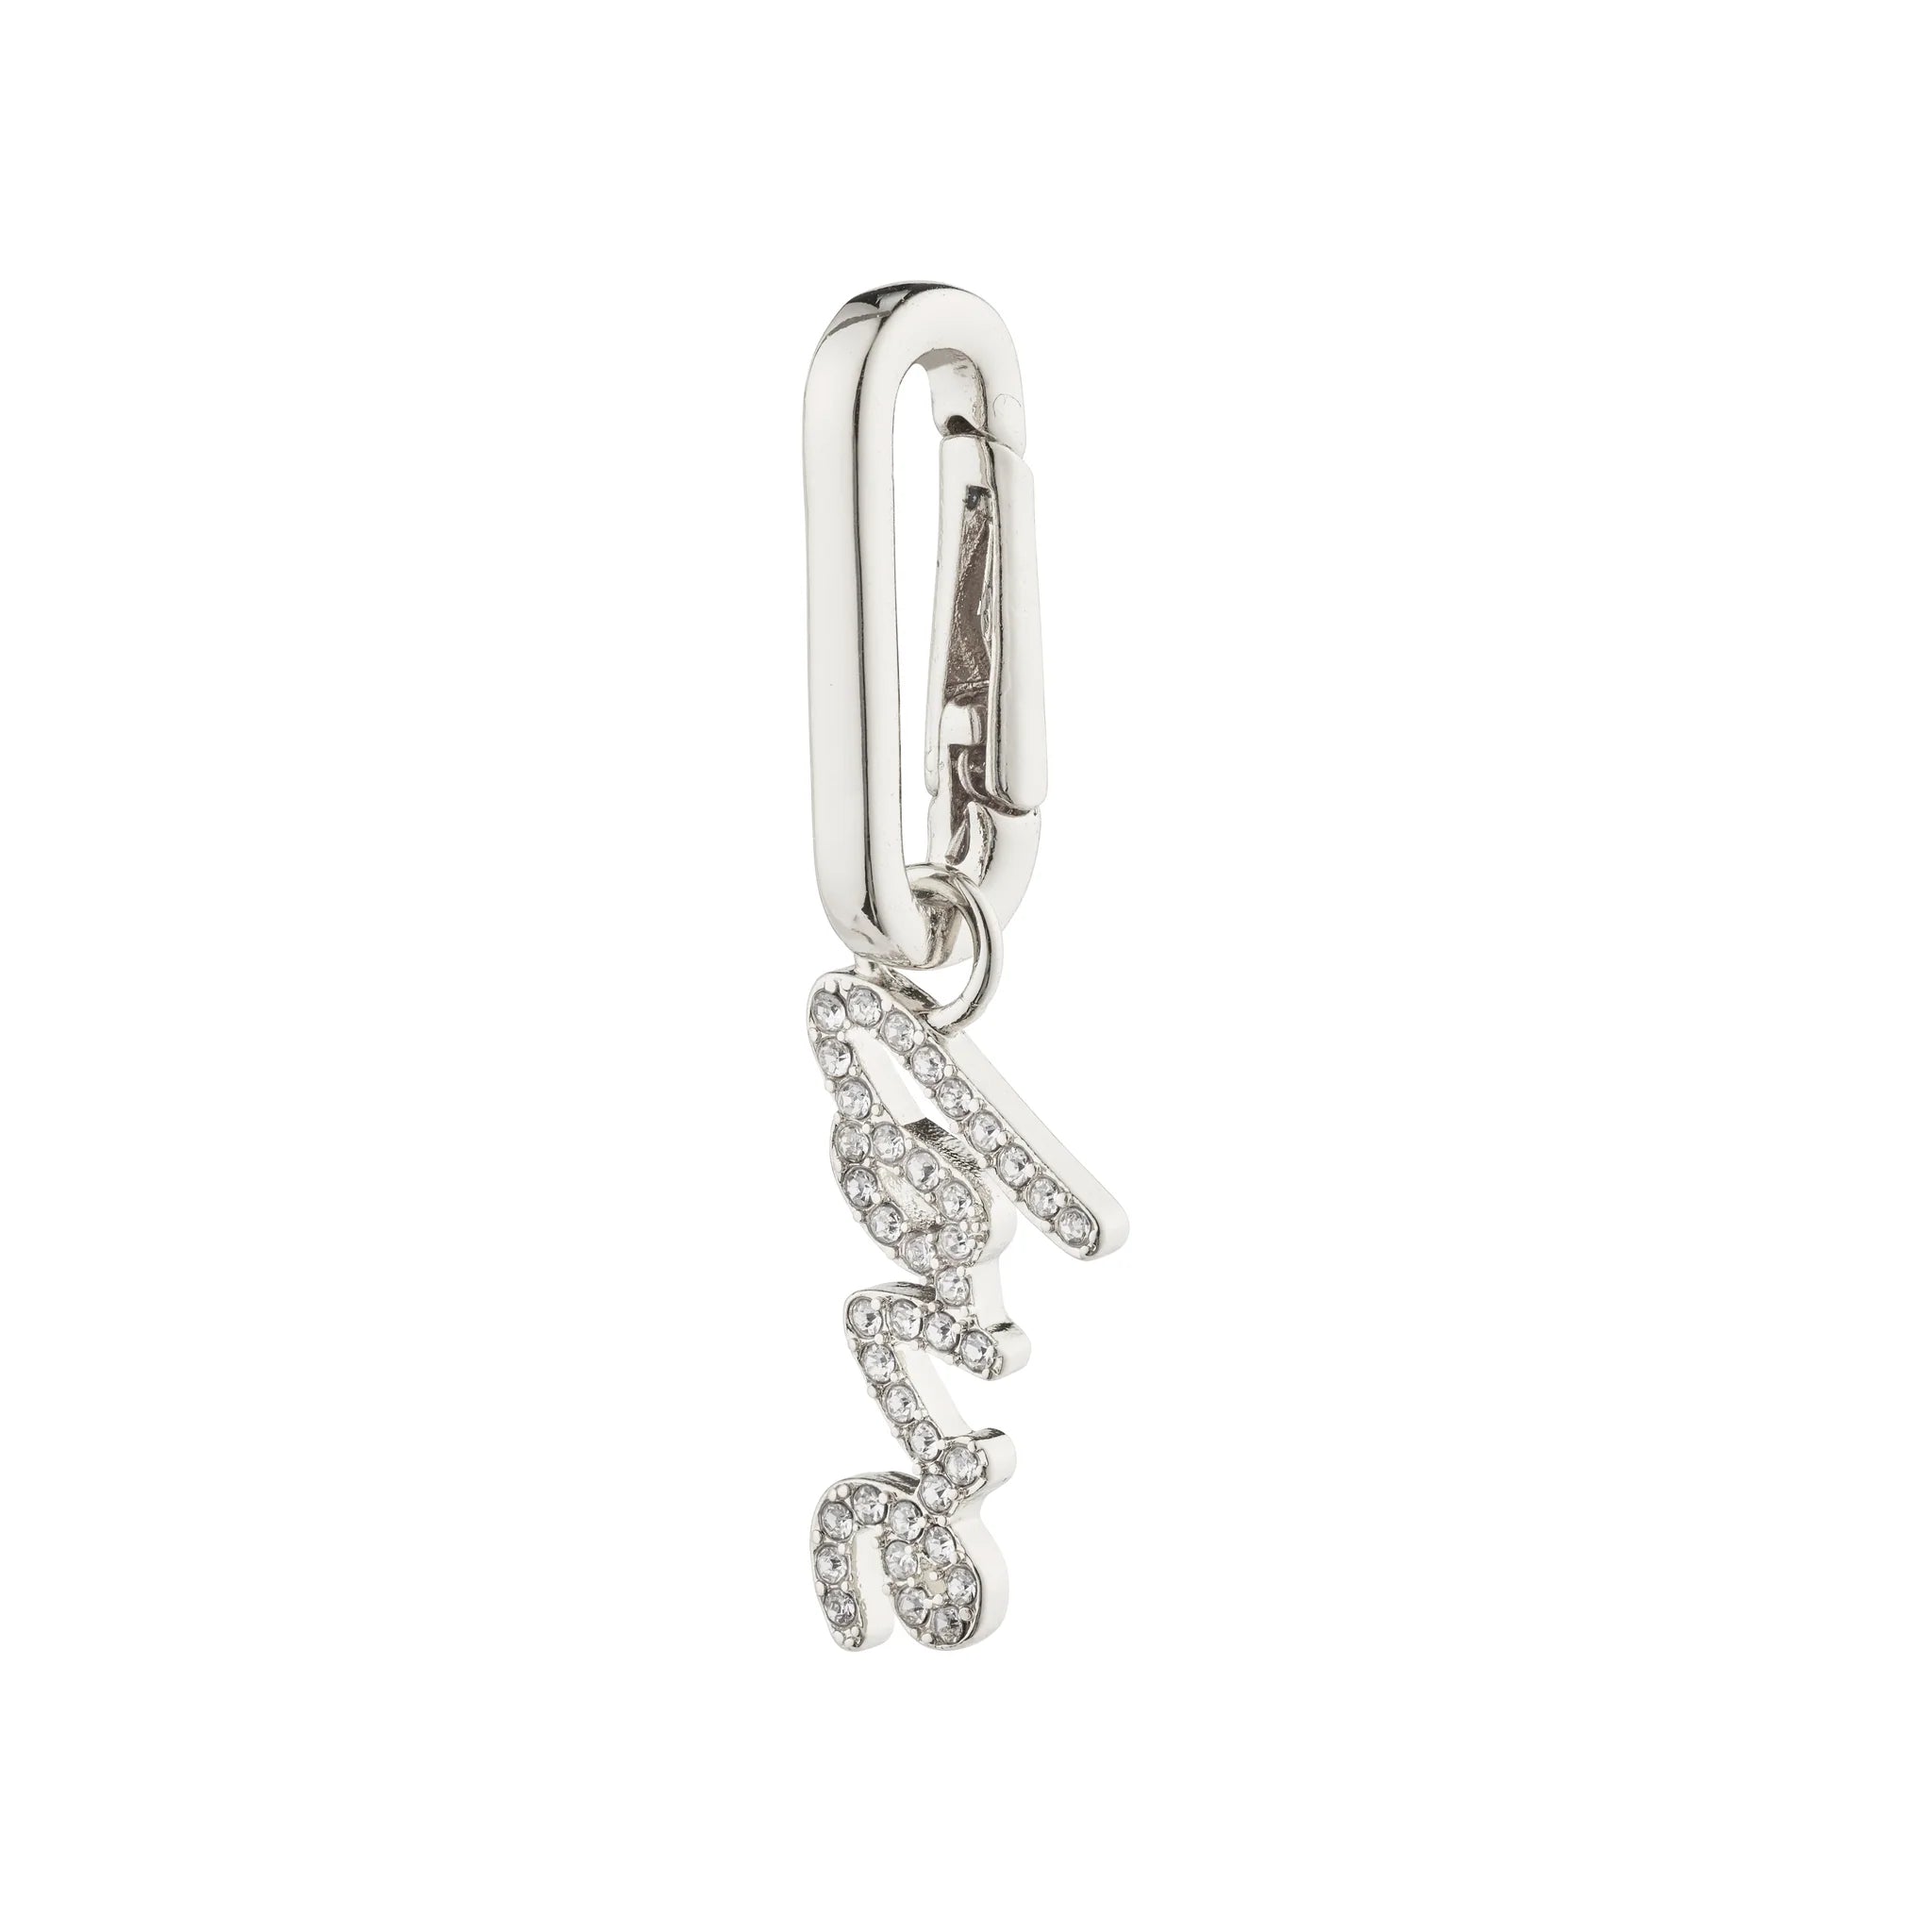 CHARM Love pendant silver-plated